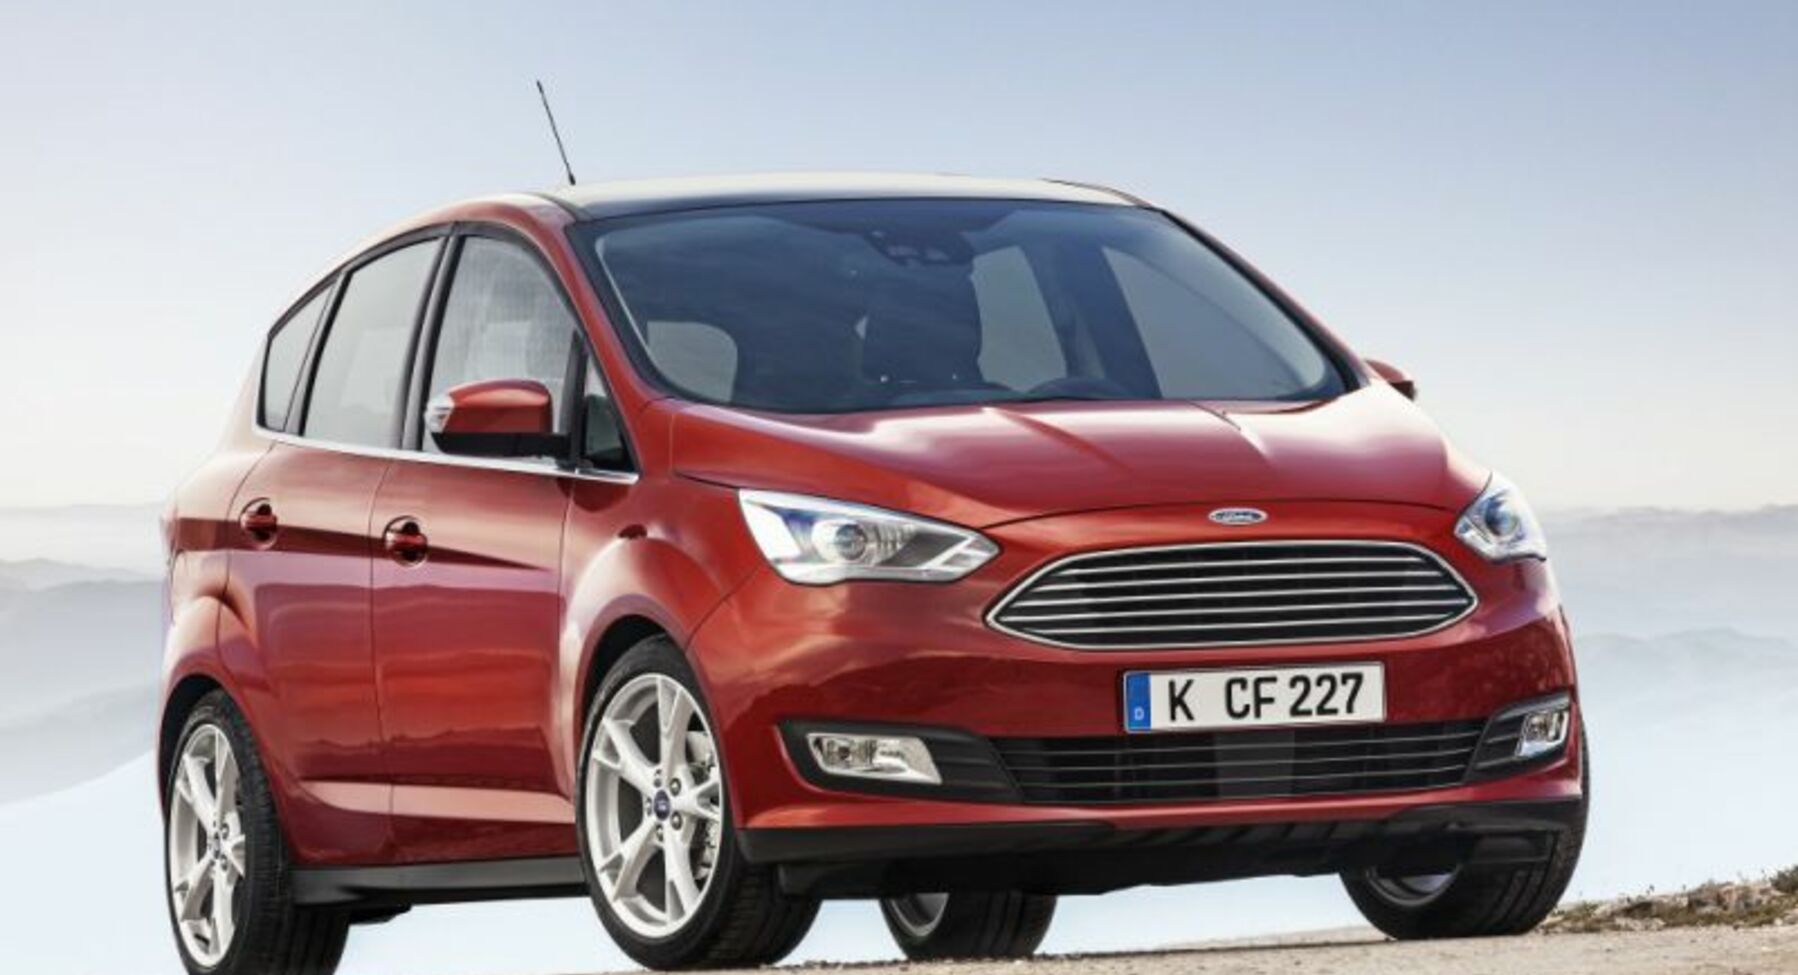 Ford C-MAX II (facelift 2015) 2.0 TDCi (150 Hp) PowerShift S&S 2015, 2016, 2017, 2018, 2019, 2020, 2021